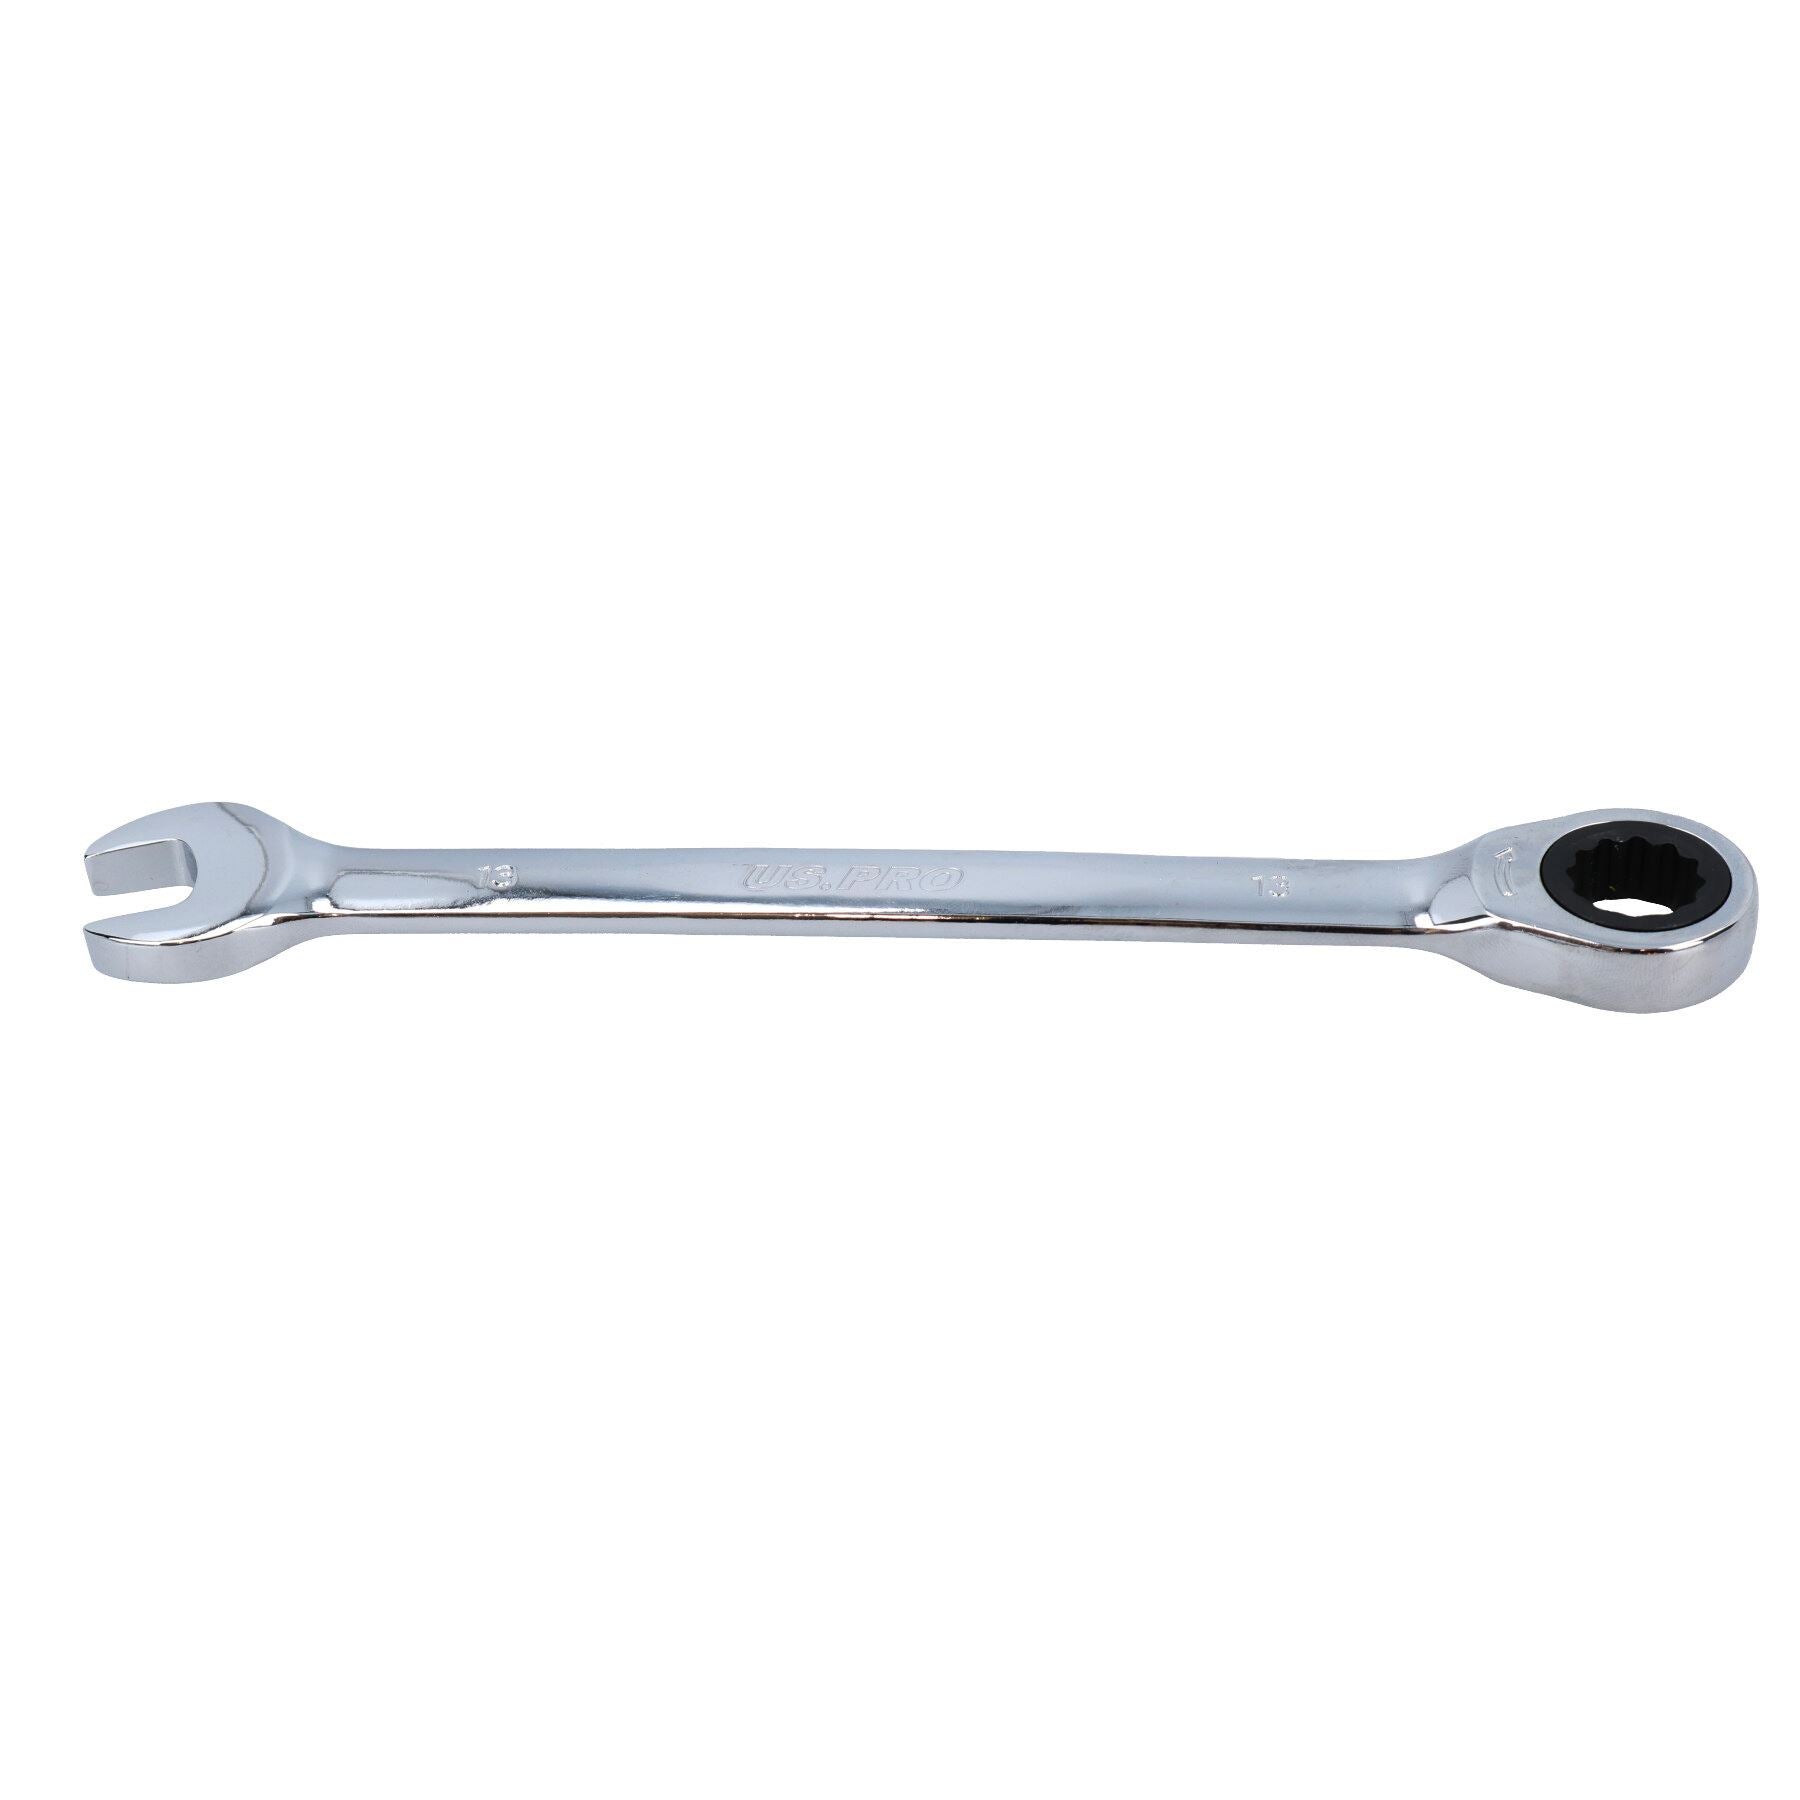 Metric Combination Gear Ratchet Spanner Wrench 72 Teeth 6 – 19mm Variation